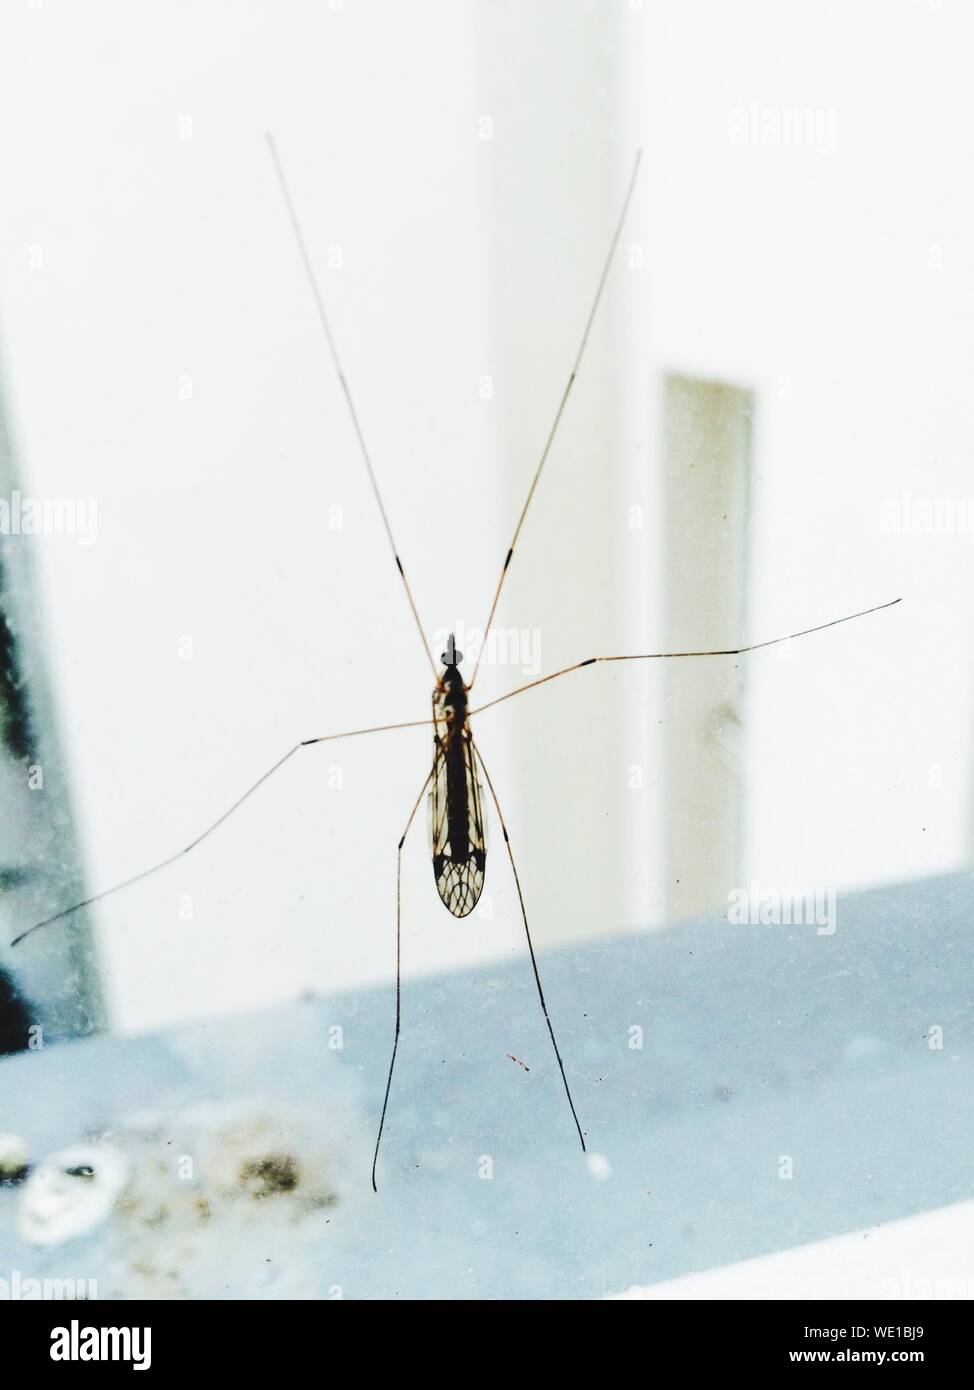 Insect With Long Legs On Glass Stock Photo